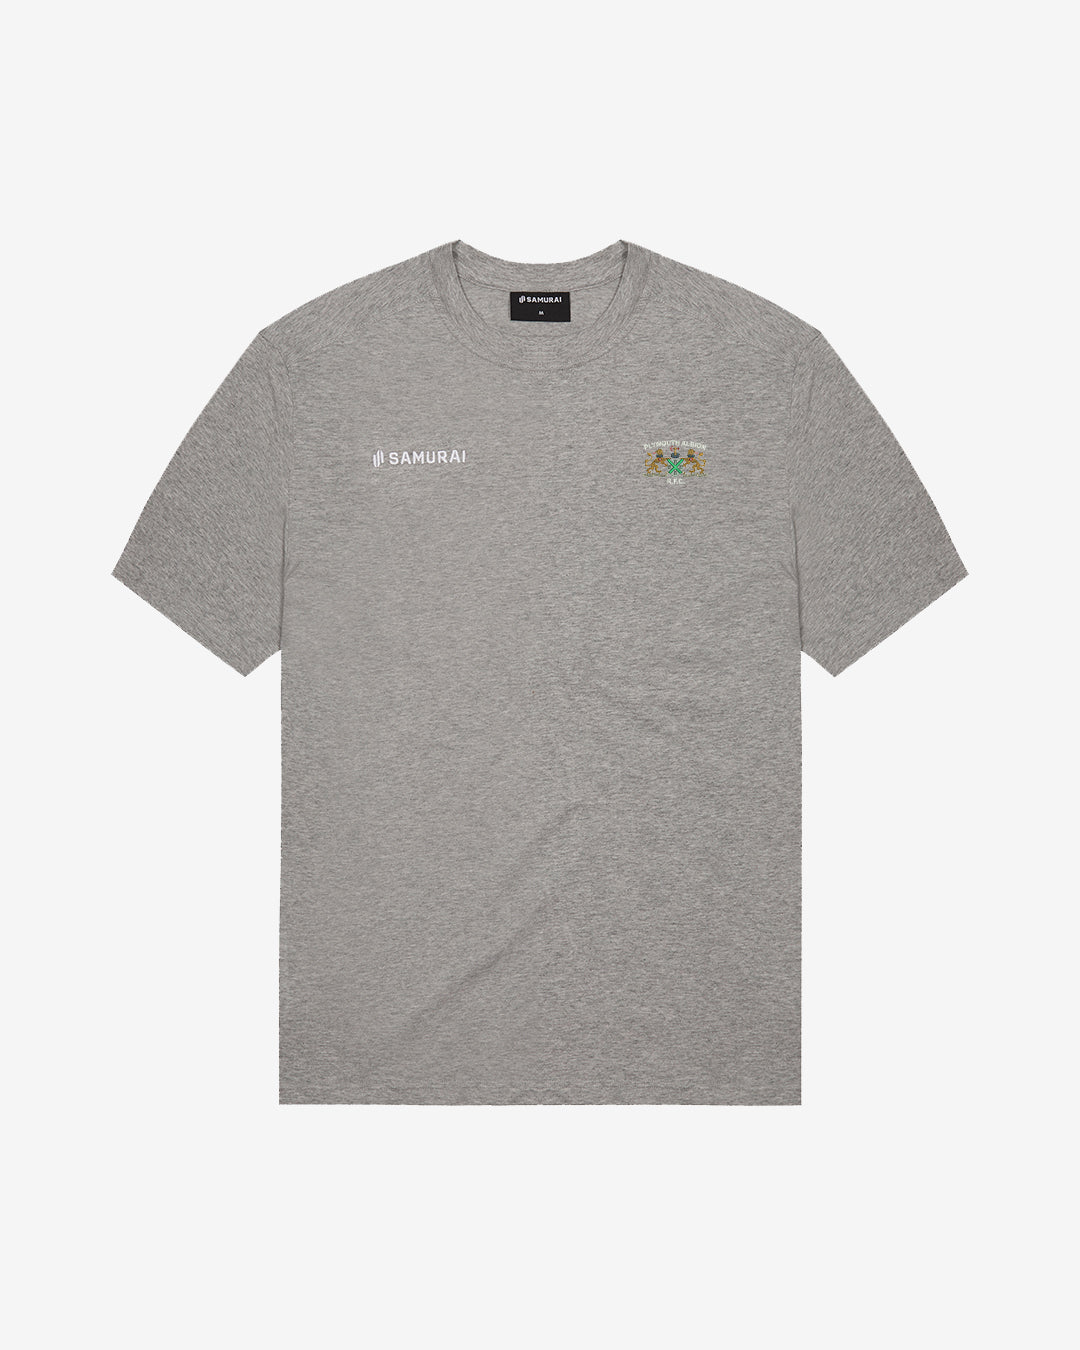 Plymouth Albion RFC - EP:0110 - Cotton Touch Tee - Grey